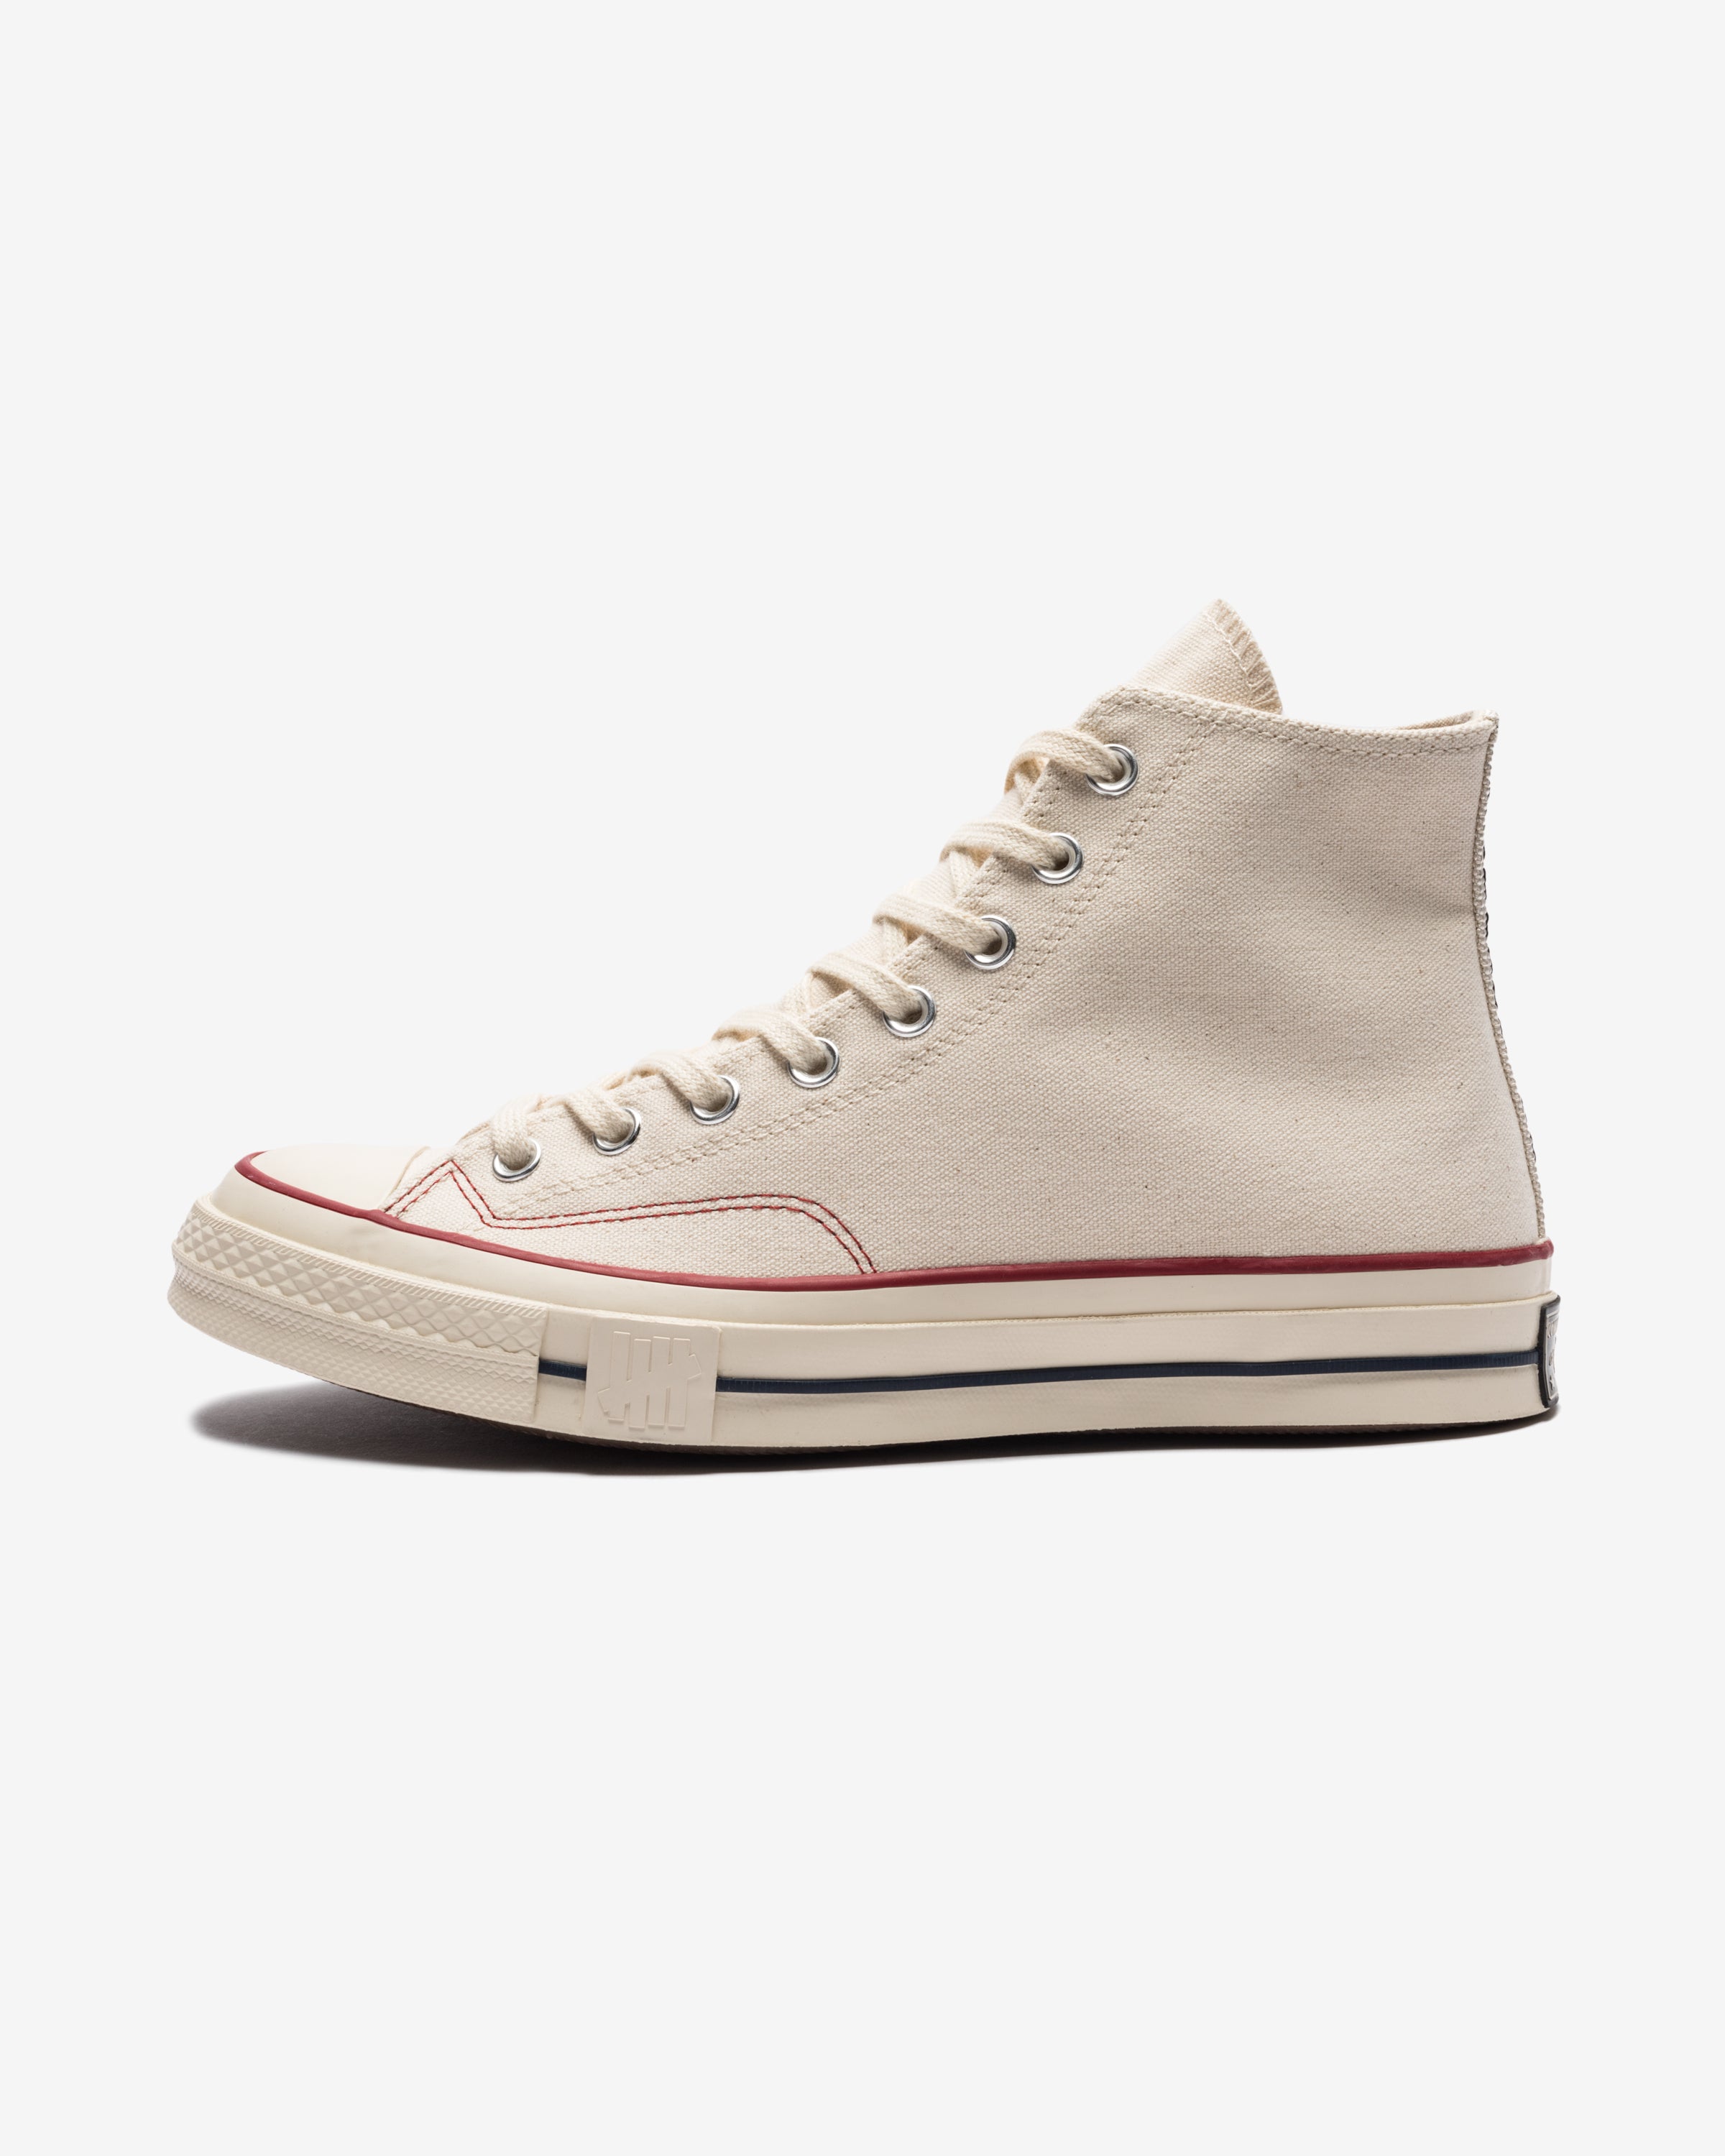 Converse X Undefeated Chuck 70 Hi Natural Fieryred Undefeated 